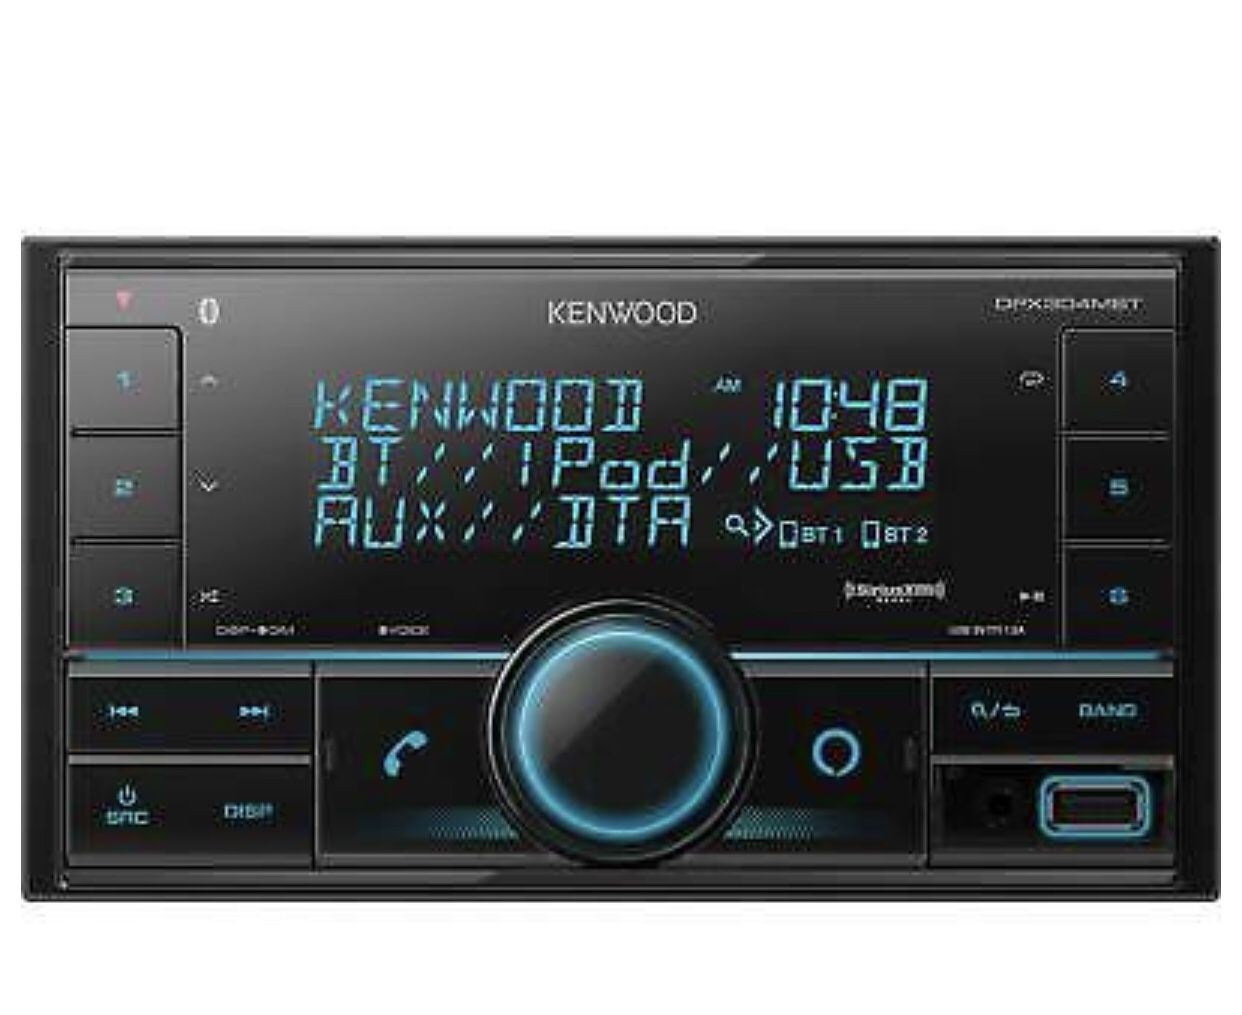 Kenwood DPX304MBT 2-DIN Car Stereo Digital Media Receiver with Bluetooth